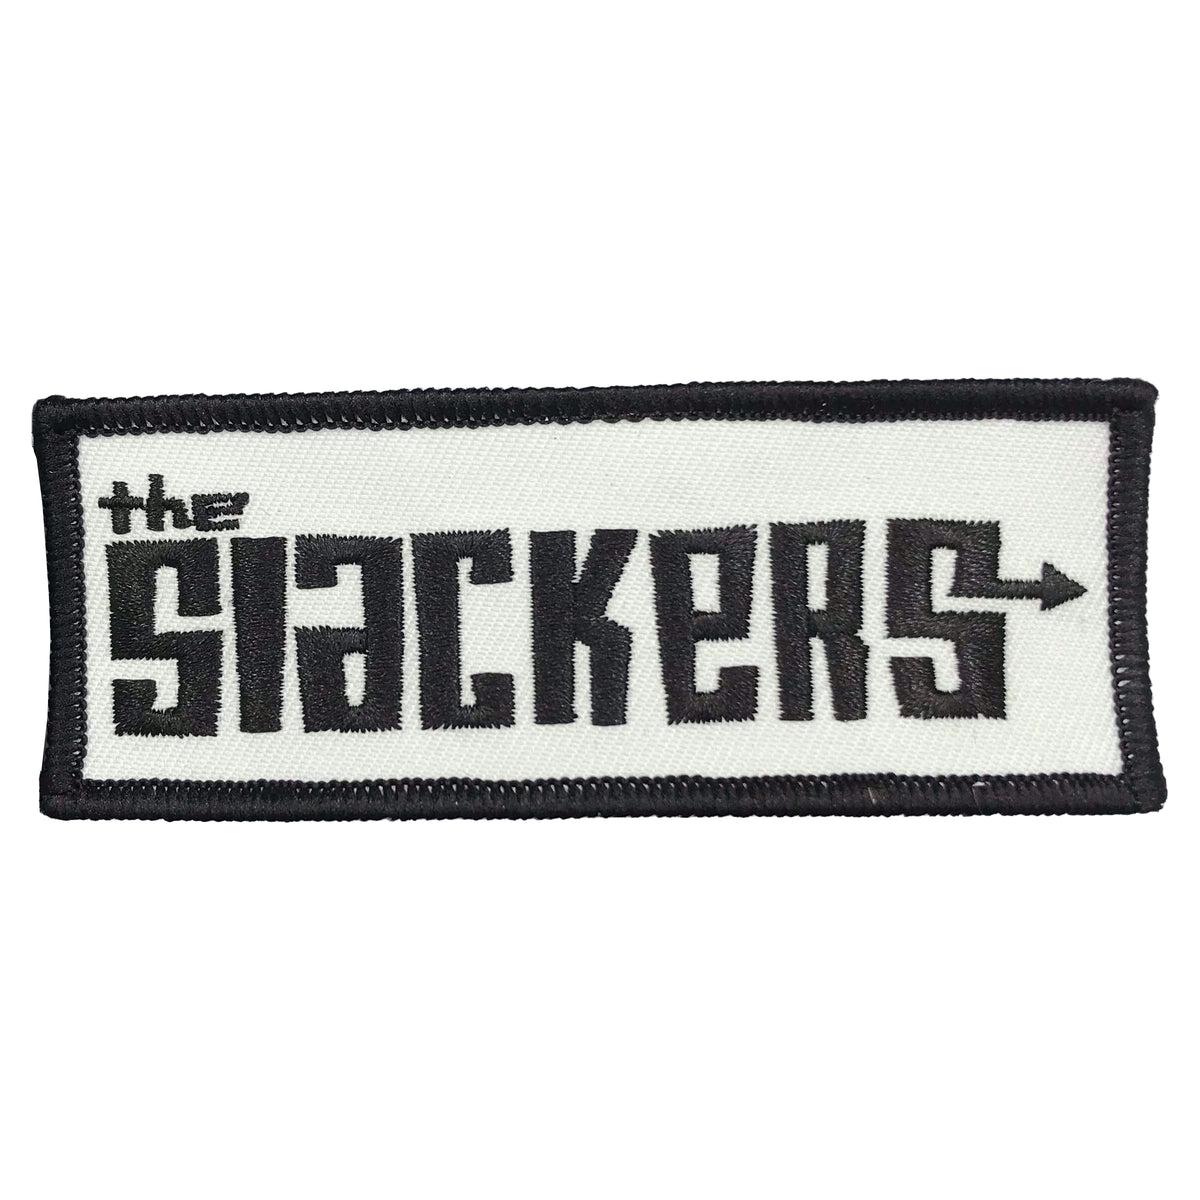 The Slackers - Text Logo - Black on White - Patch - Embroidered - 4&quot; x 1.5&quot;